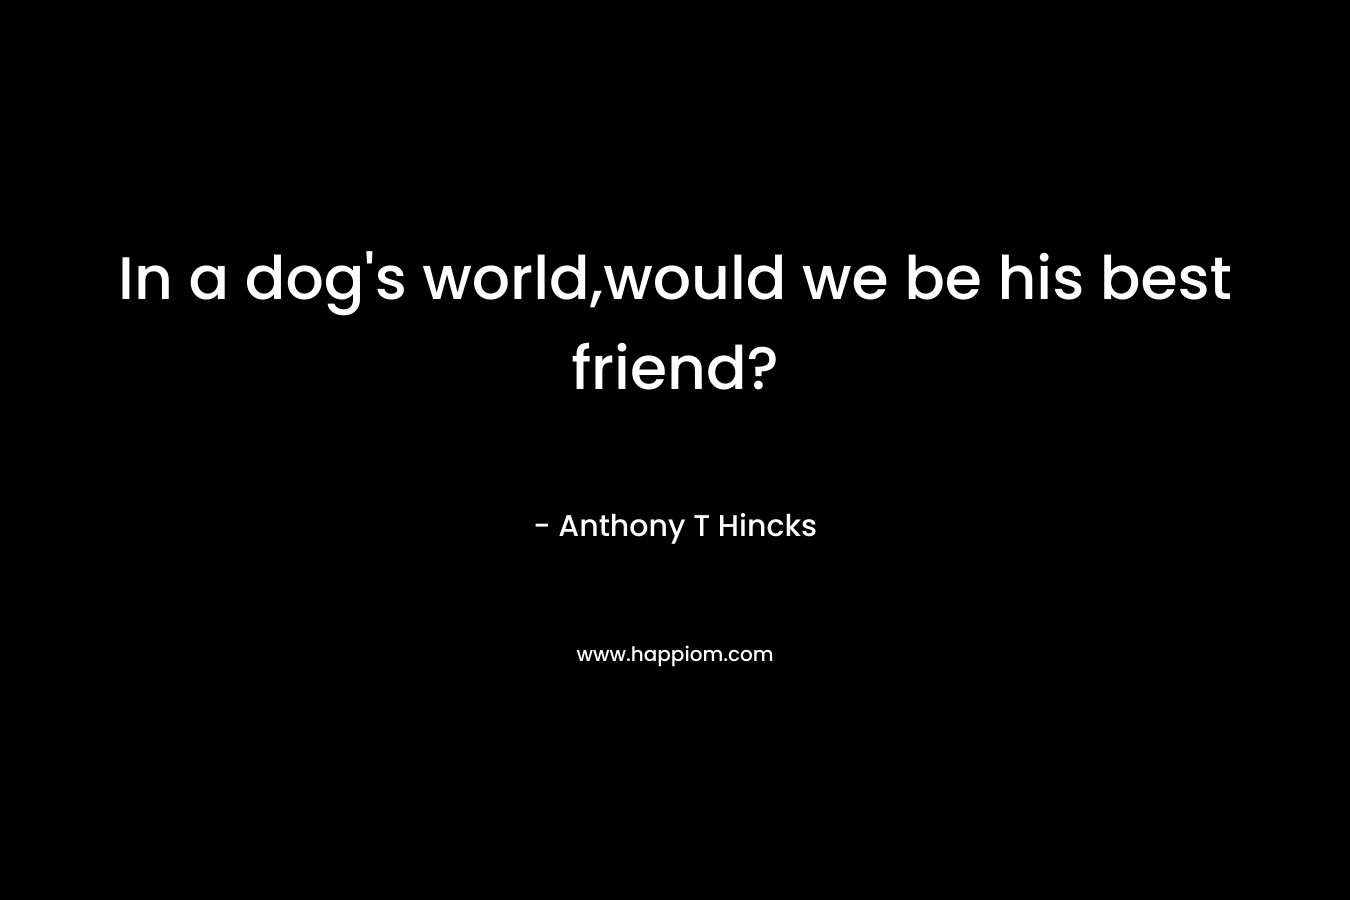 In a dog's world,would we be his best friend?